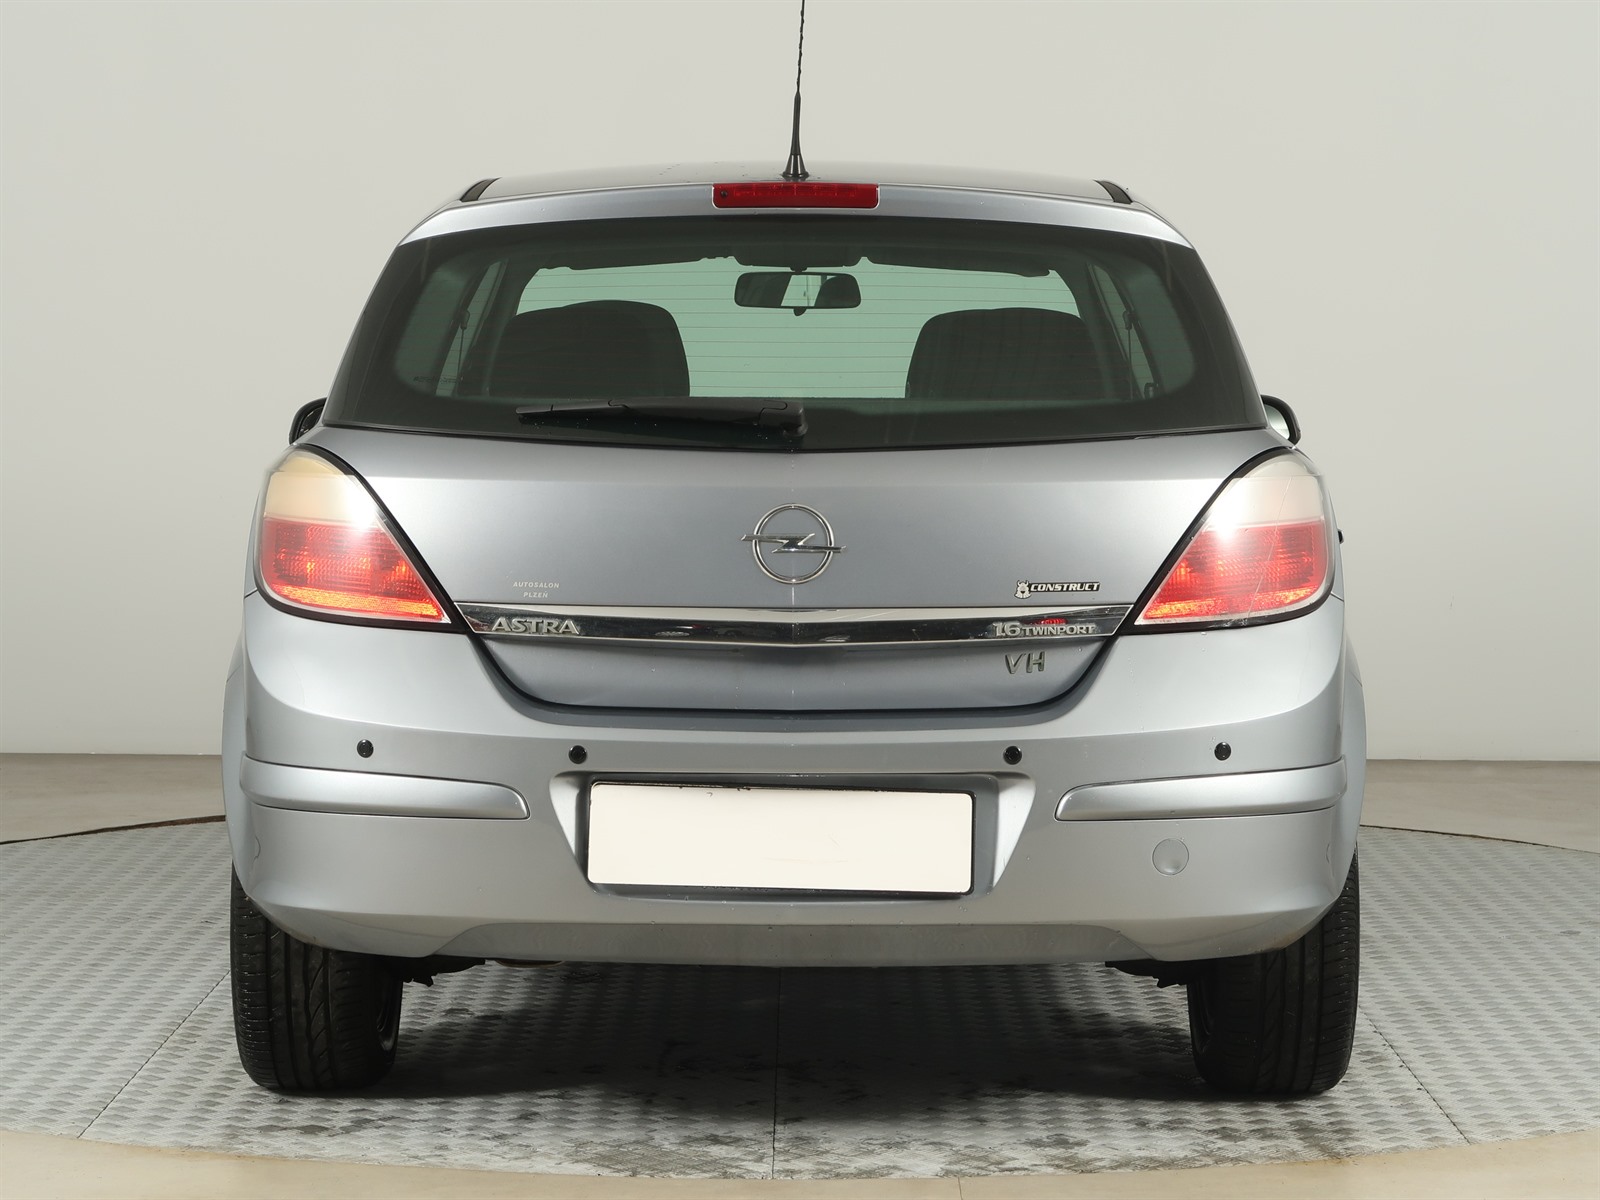 Opel Astra, 2006 - pohled č. 6